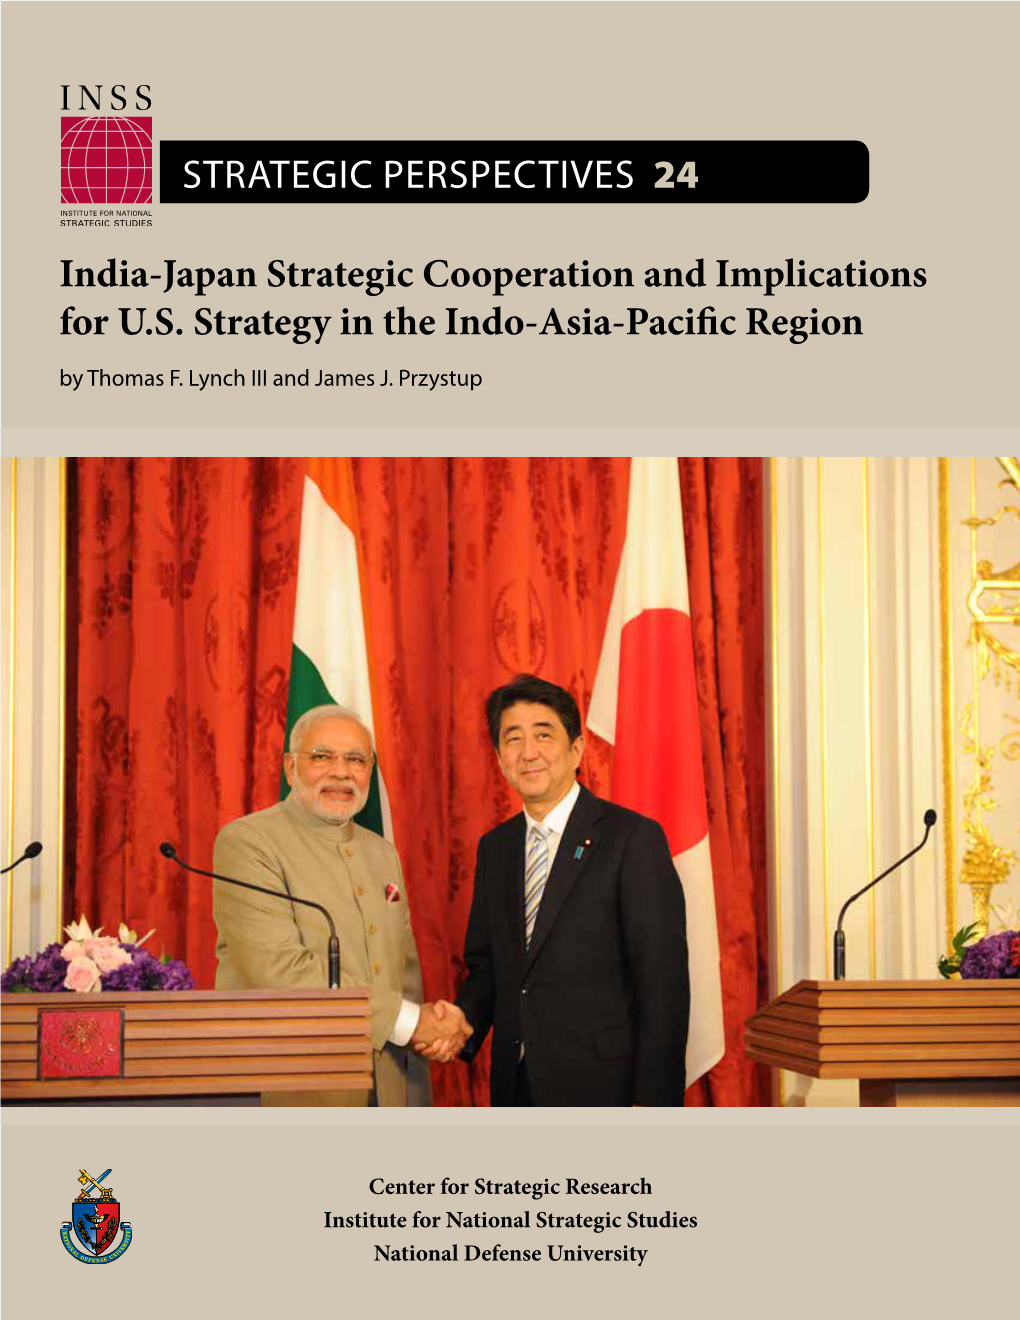 India-Japan Strategic Cooperation and Implications for U.S